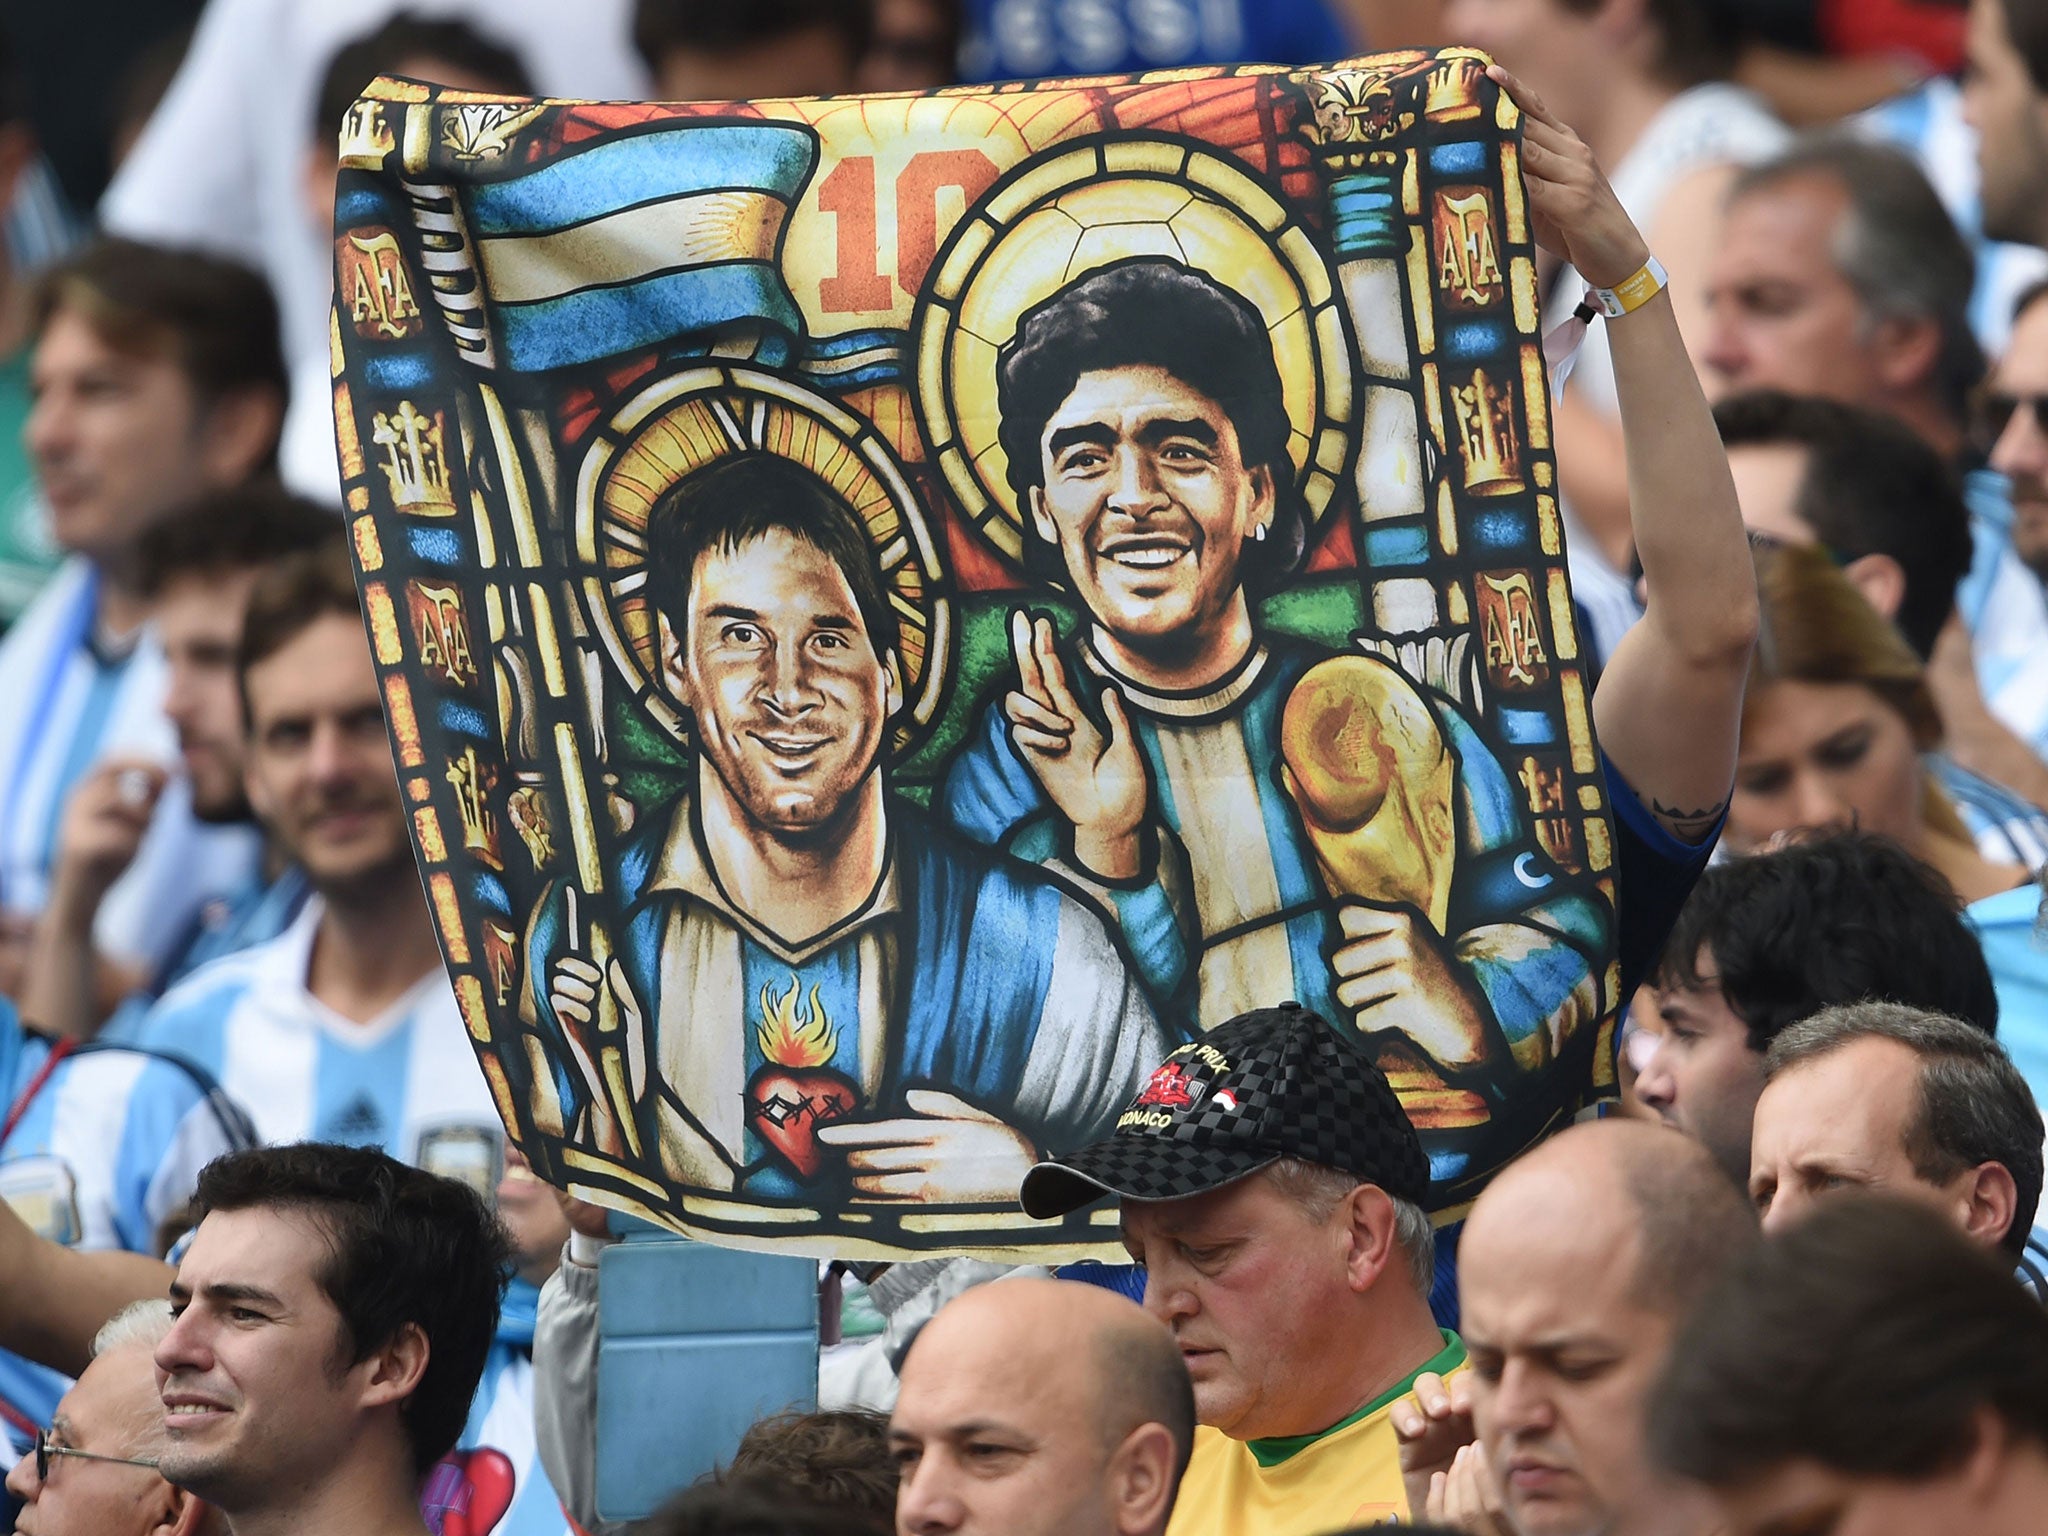 An Argentina's fan holds an image of Argentina's forward Lionel Messi and former footballer Diego Maradona as Saints, before for the Group F football match between Nigeria and Argentina at the Beira-Rio Stadium in Porto Alegre during the 2014 FIFA World C